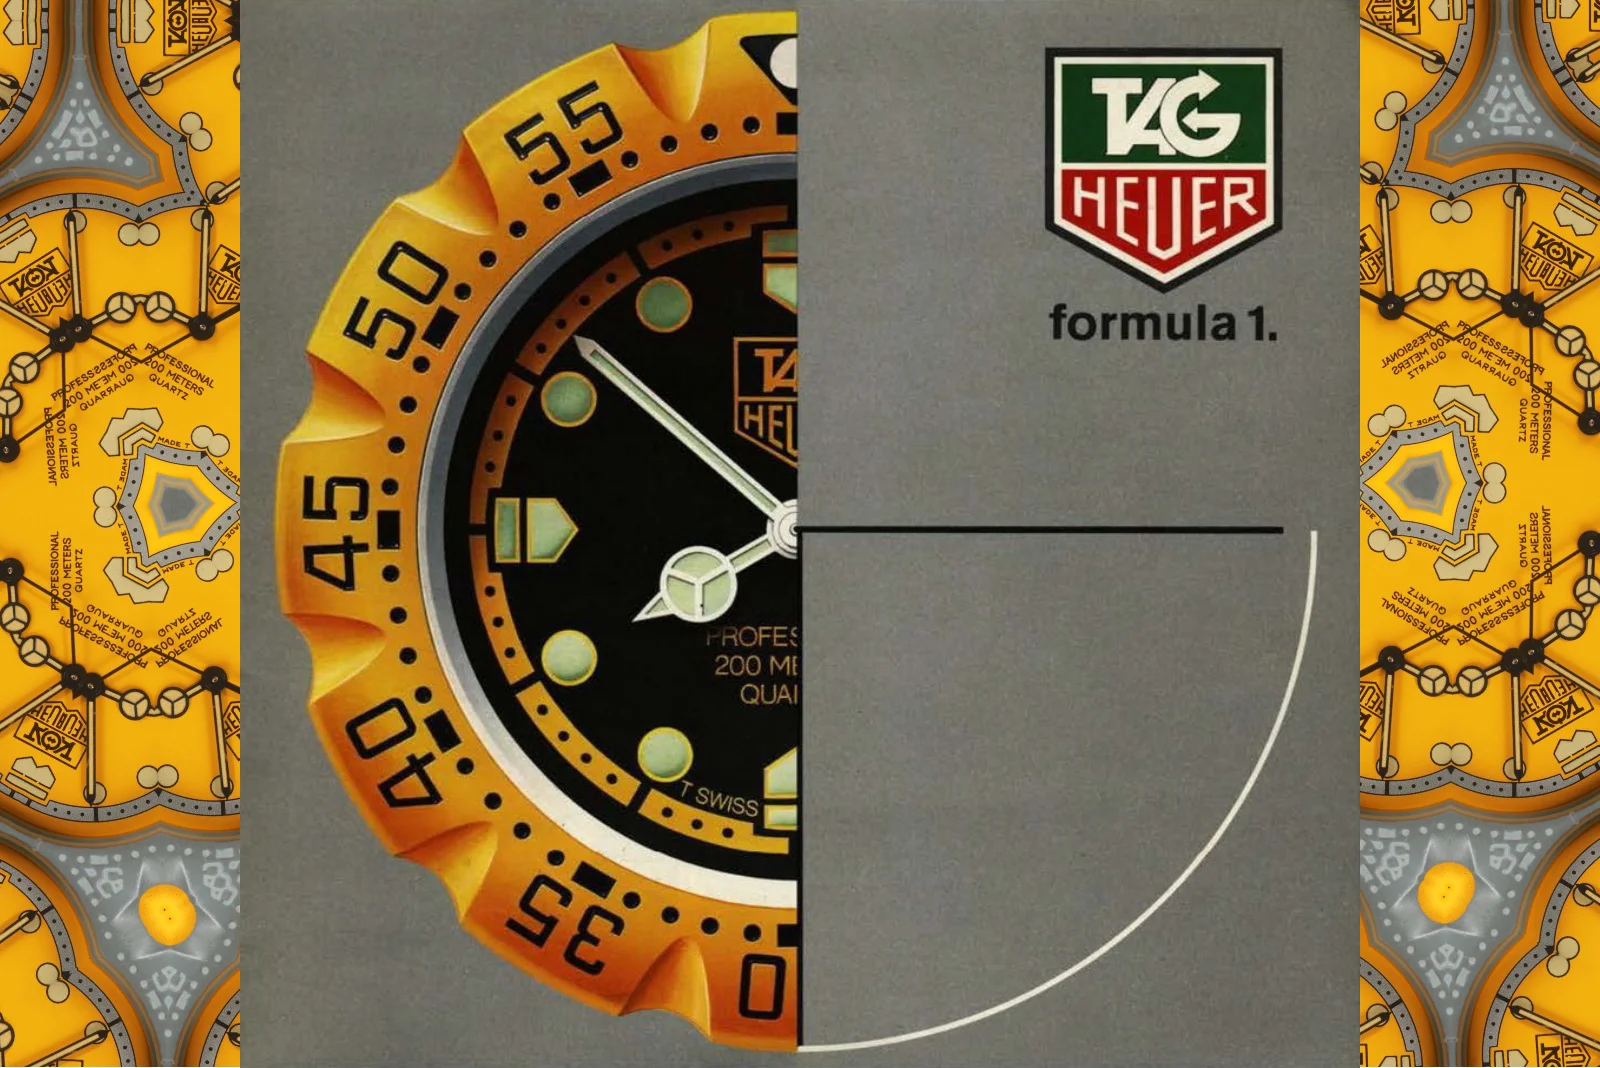 It's Time For TAG Heuer To Bring Back The Original Formula One Watch